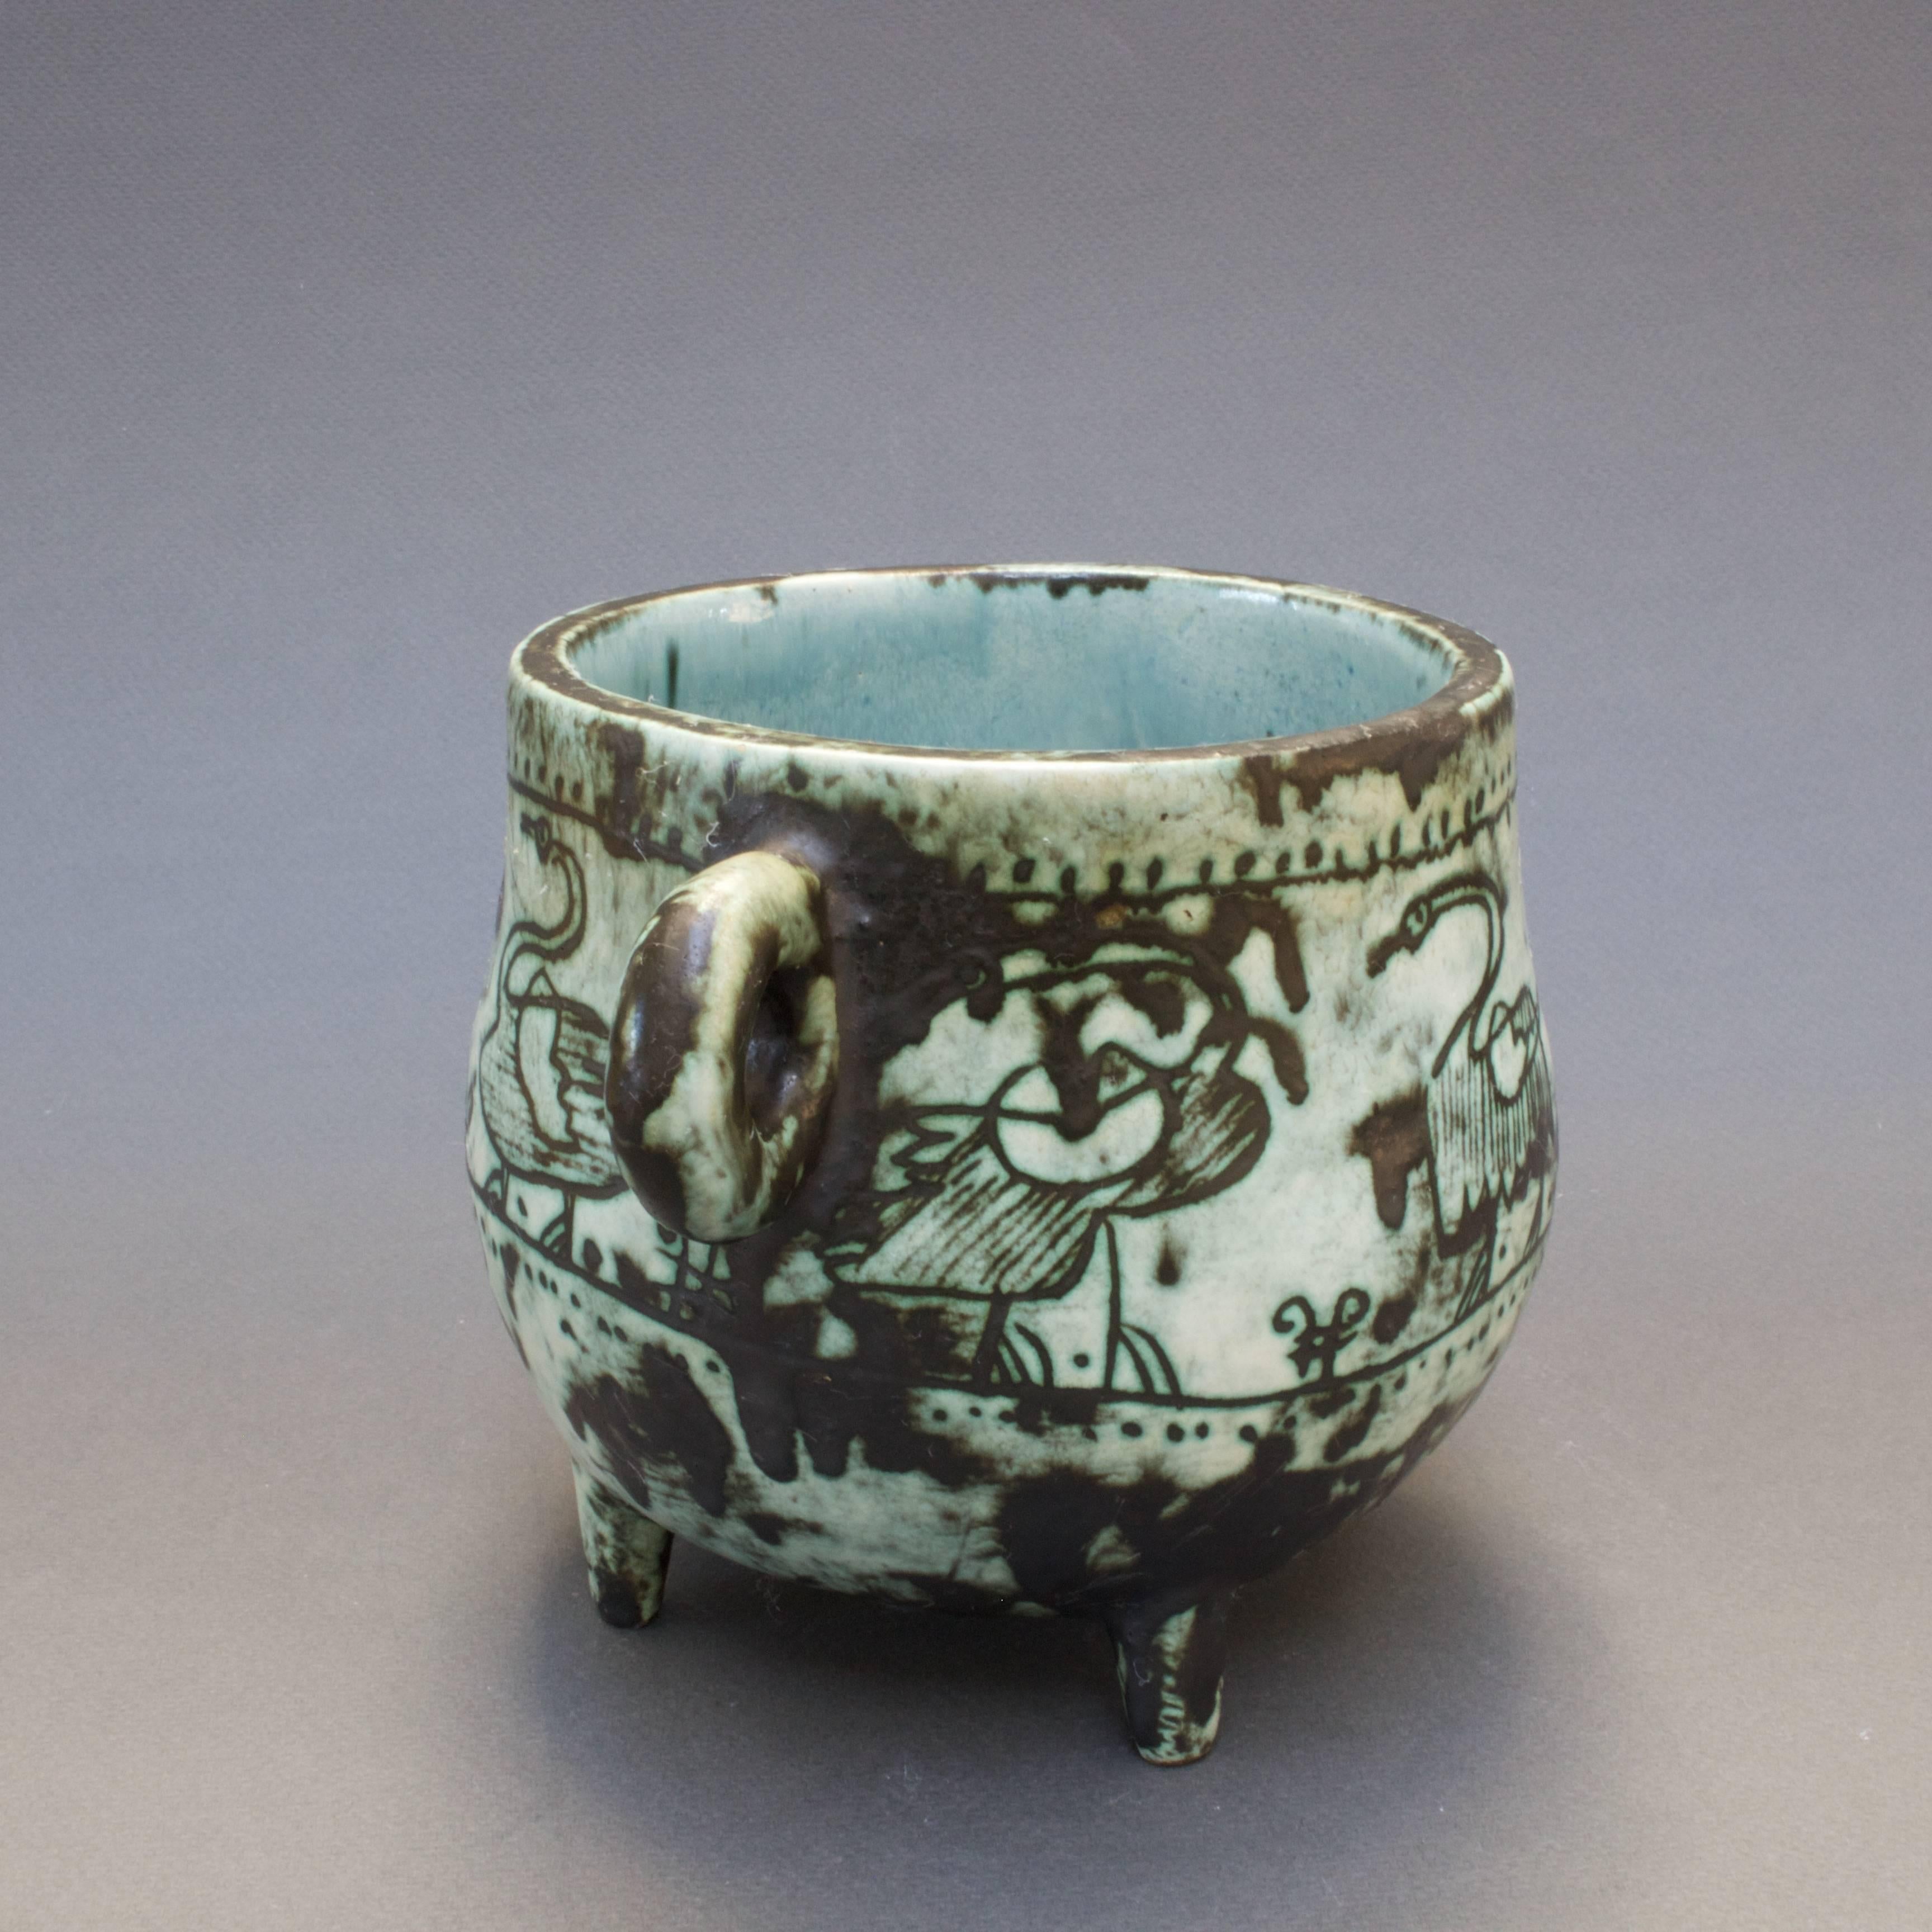 Ceramic pot (circa 1950s) by Jacques Blin (1920-1995), an engineer by trade but with a love for the visual arts and an immediately recognizable style. A way of working characterized by a more or less misty appearance of the glaze and by decoration